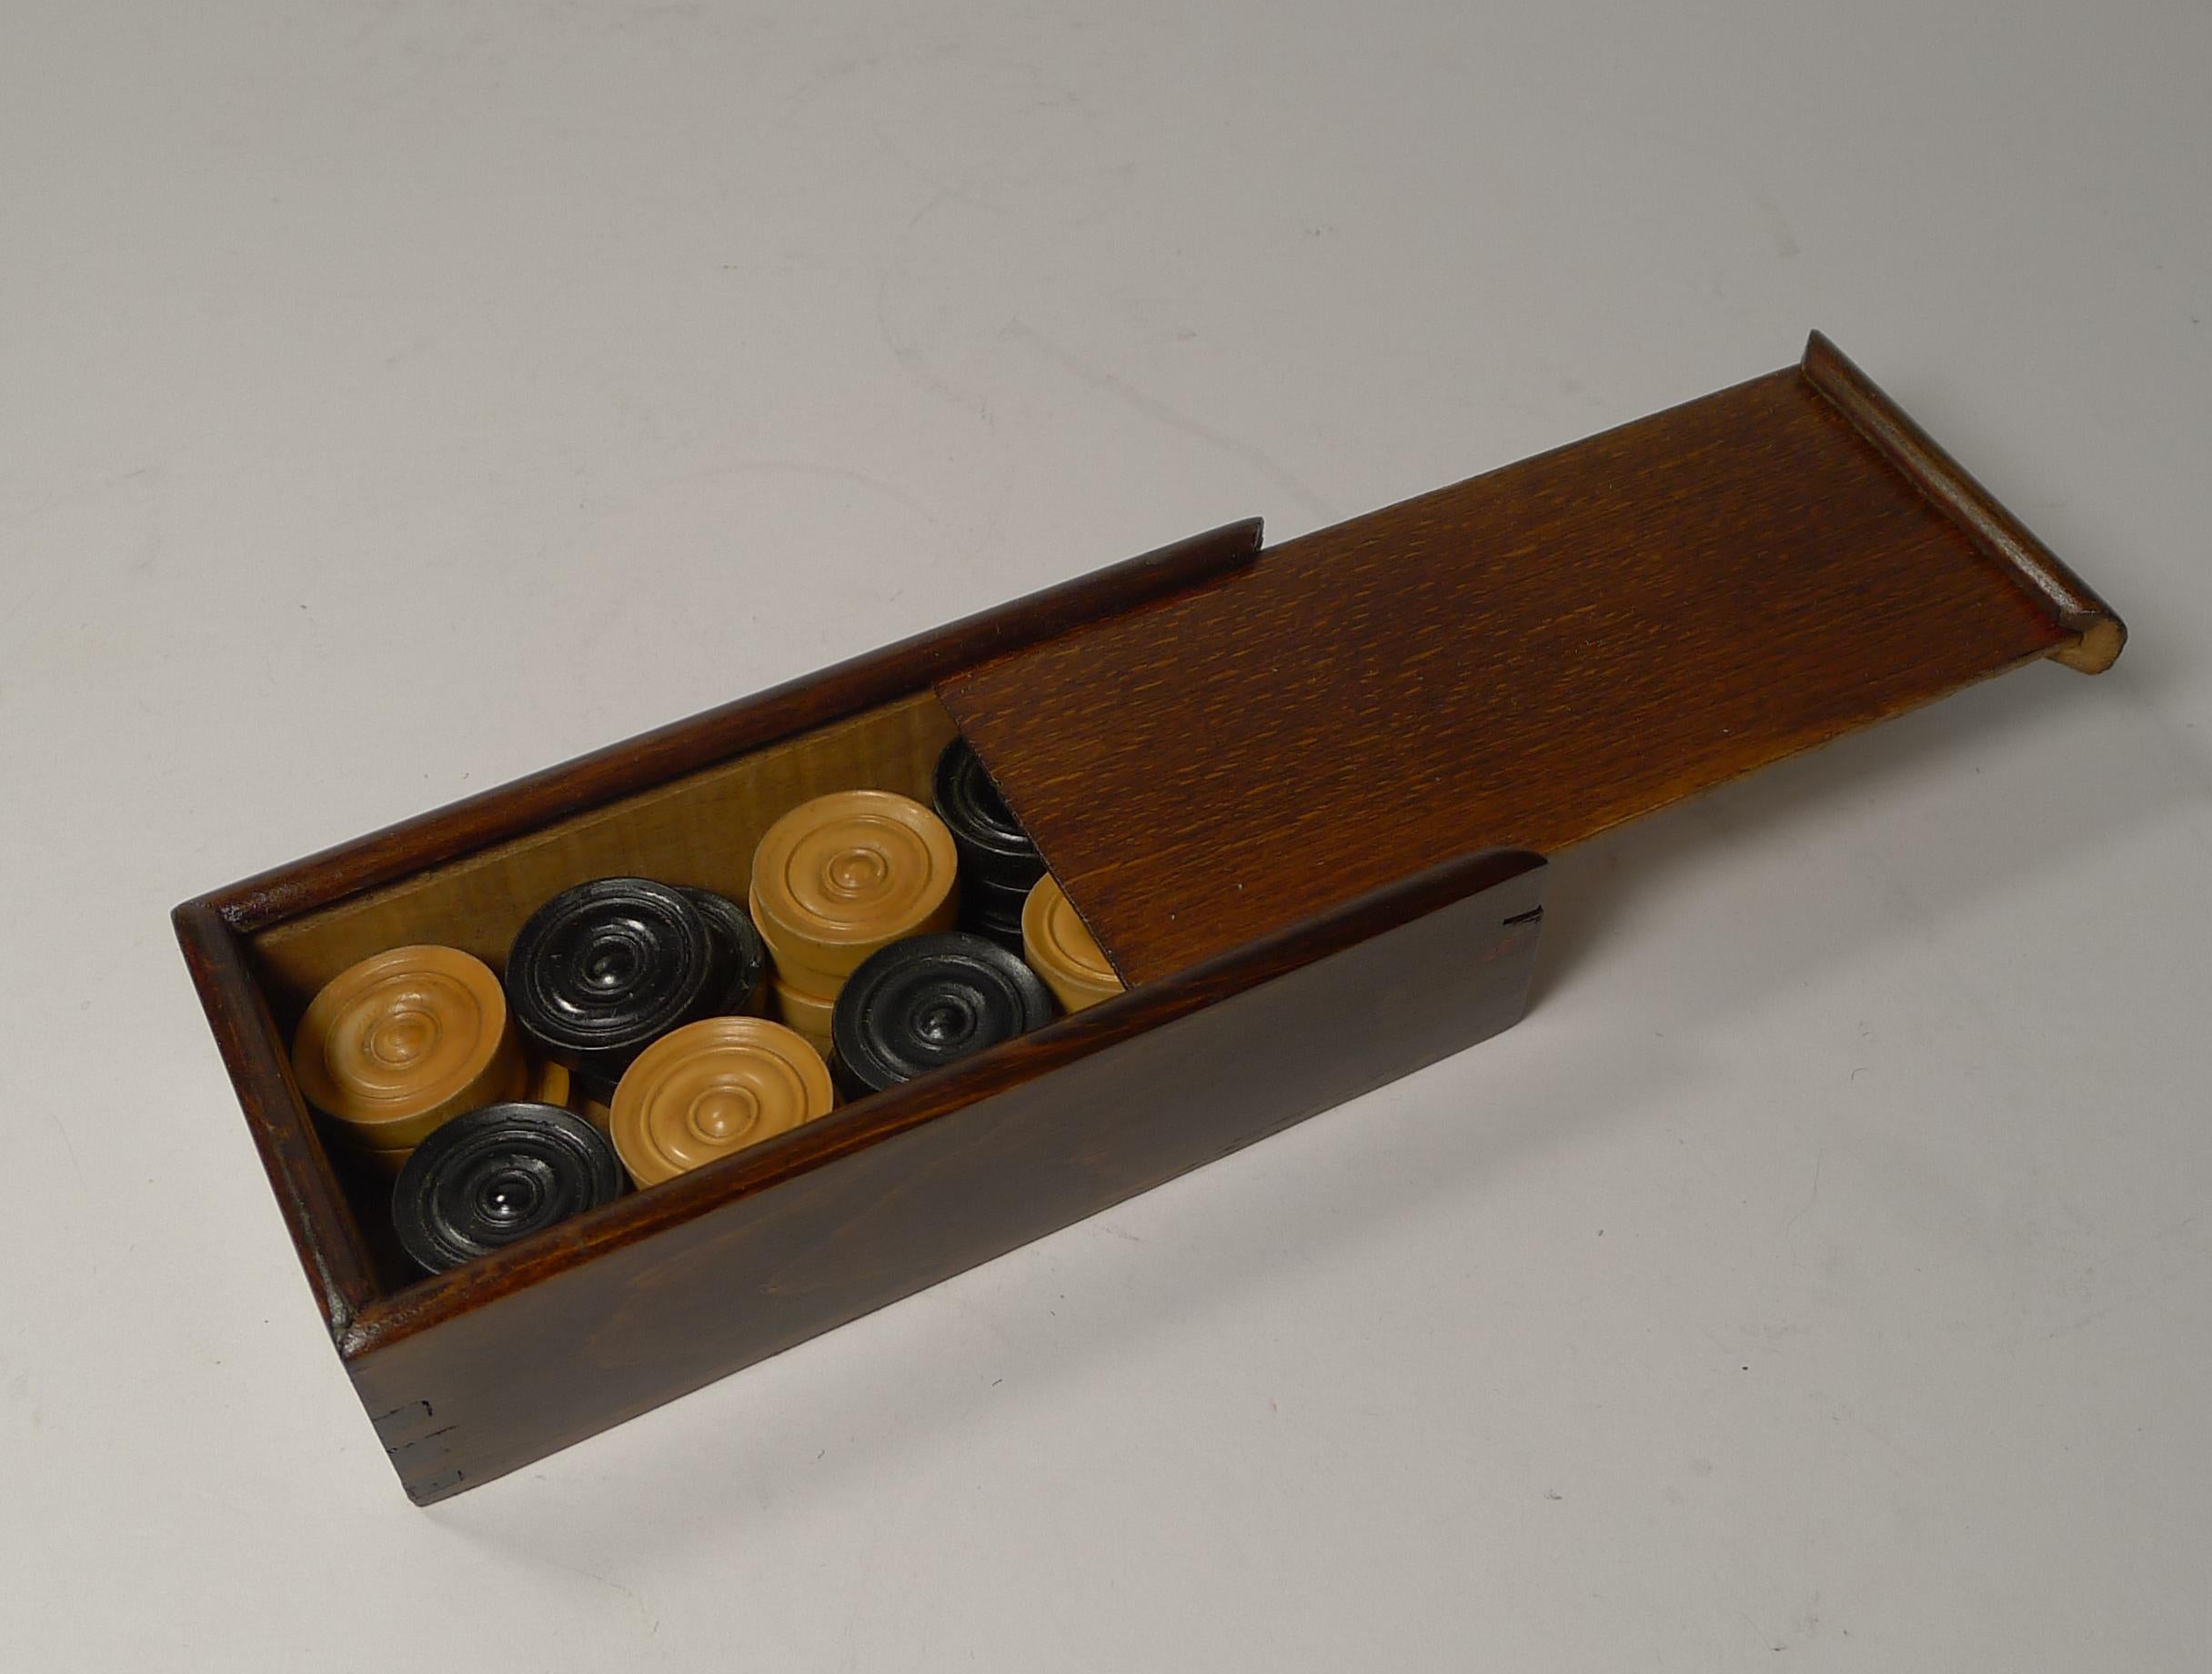 Rather unusual, this set is smaller than most found and would suit a smaller games or backgammon board. 

A fabulous boxed set of late Victorian or early Edwardian games counters, perfect for Draughts or Backgammon.

The set is complete and